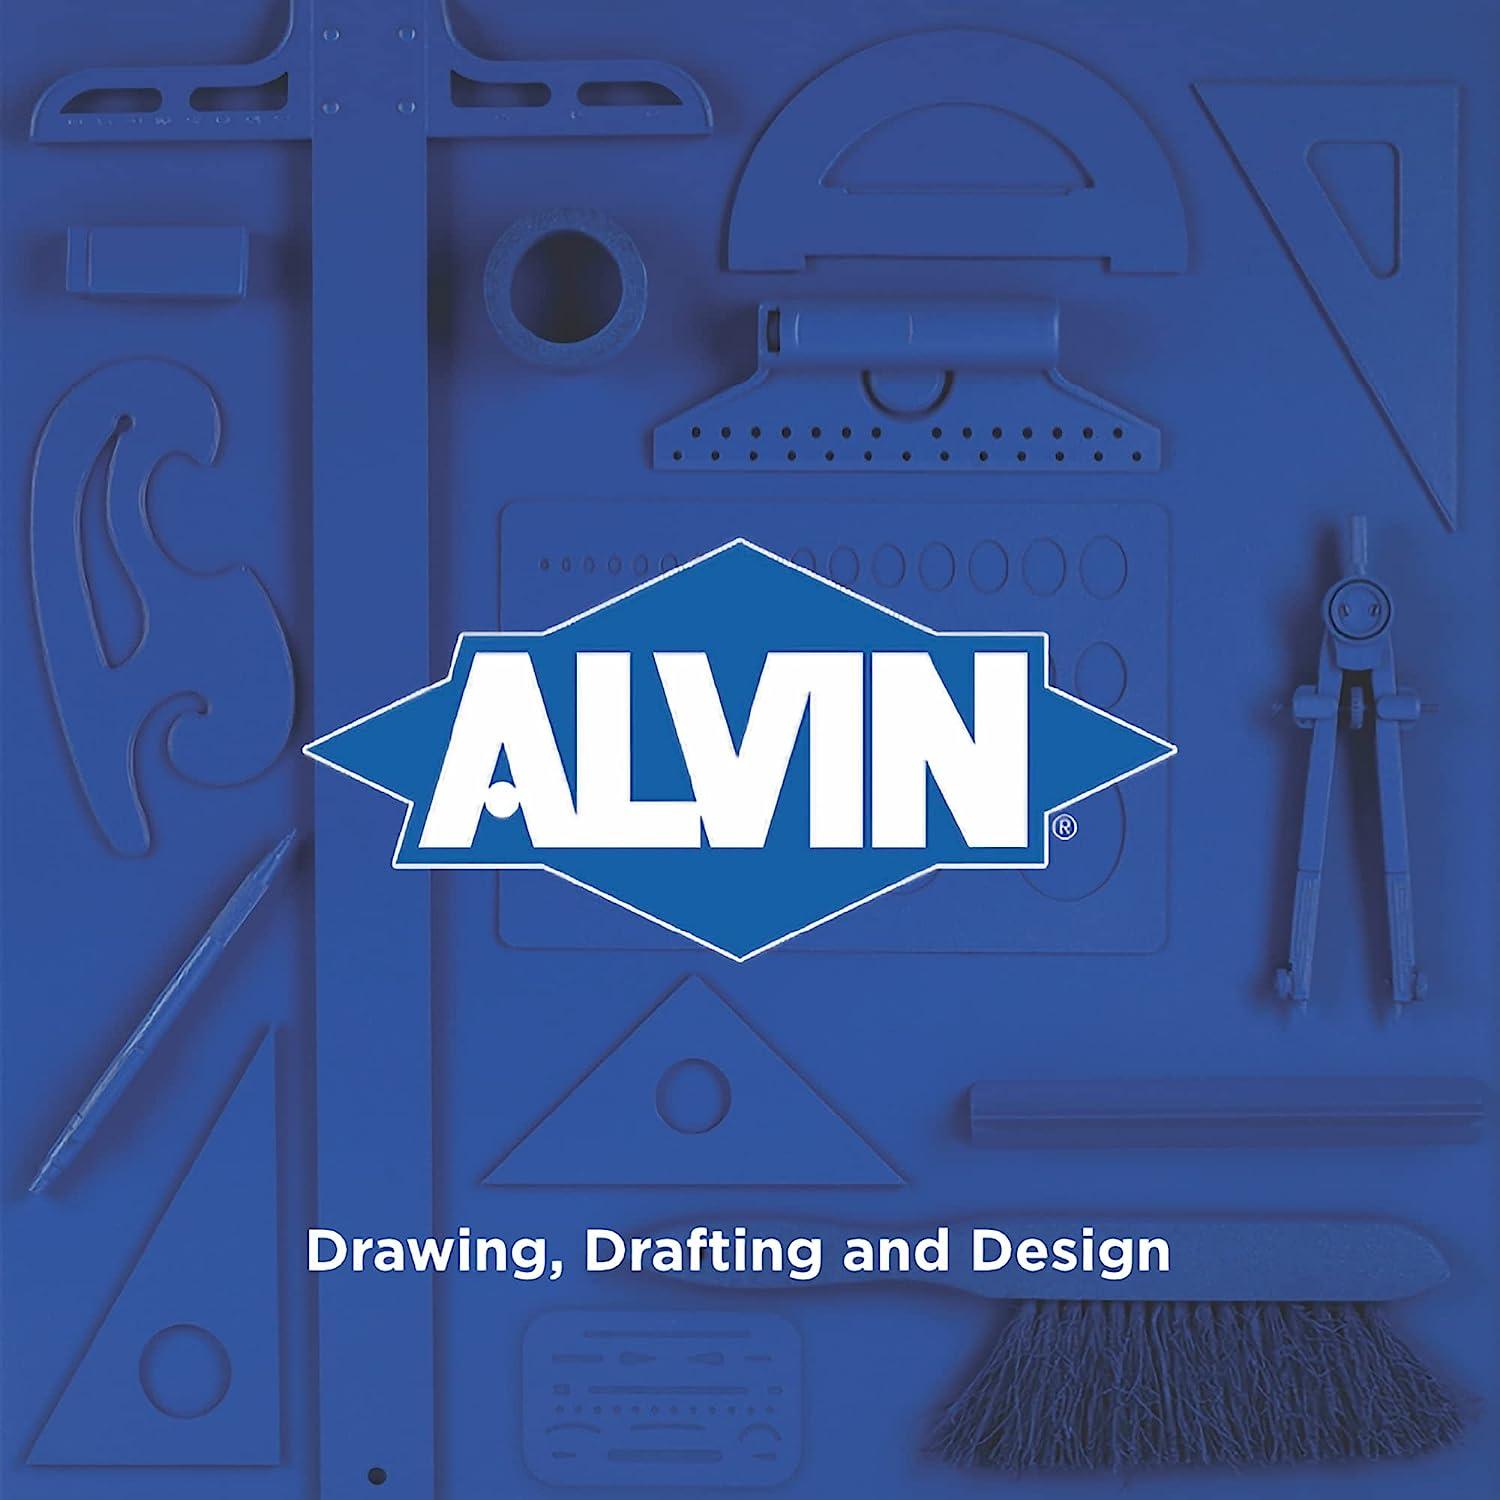 ALVIN 55W-G Lightweight Tracing Paper Roll, White, Suitable with Ink,  Charcoal, Felt Tip Pen, for Sketching or Detailing - 12 Inches, 50 Yards,  1-inch Core 12 50 Yards